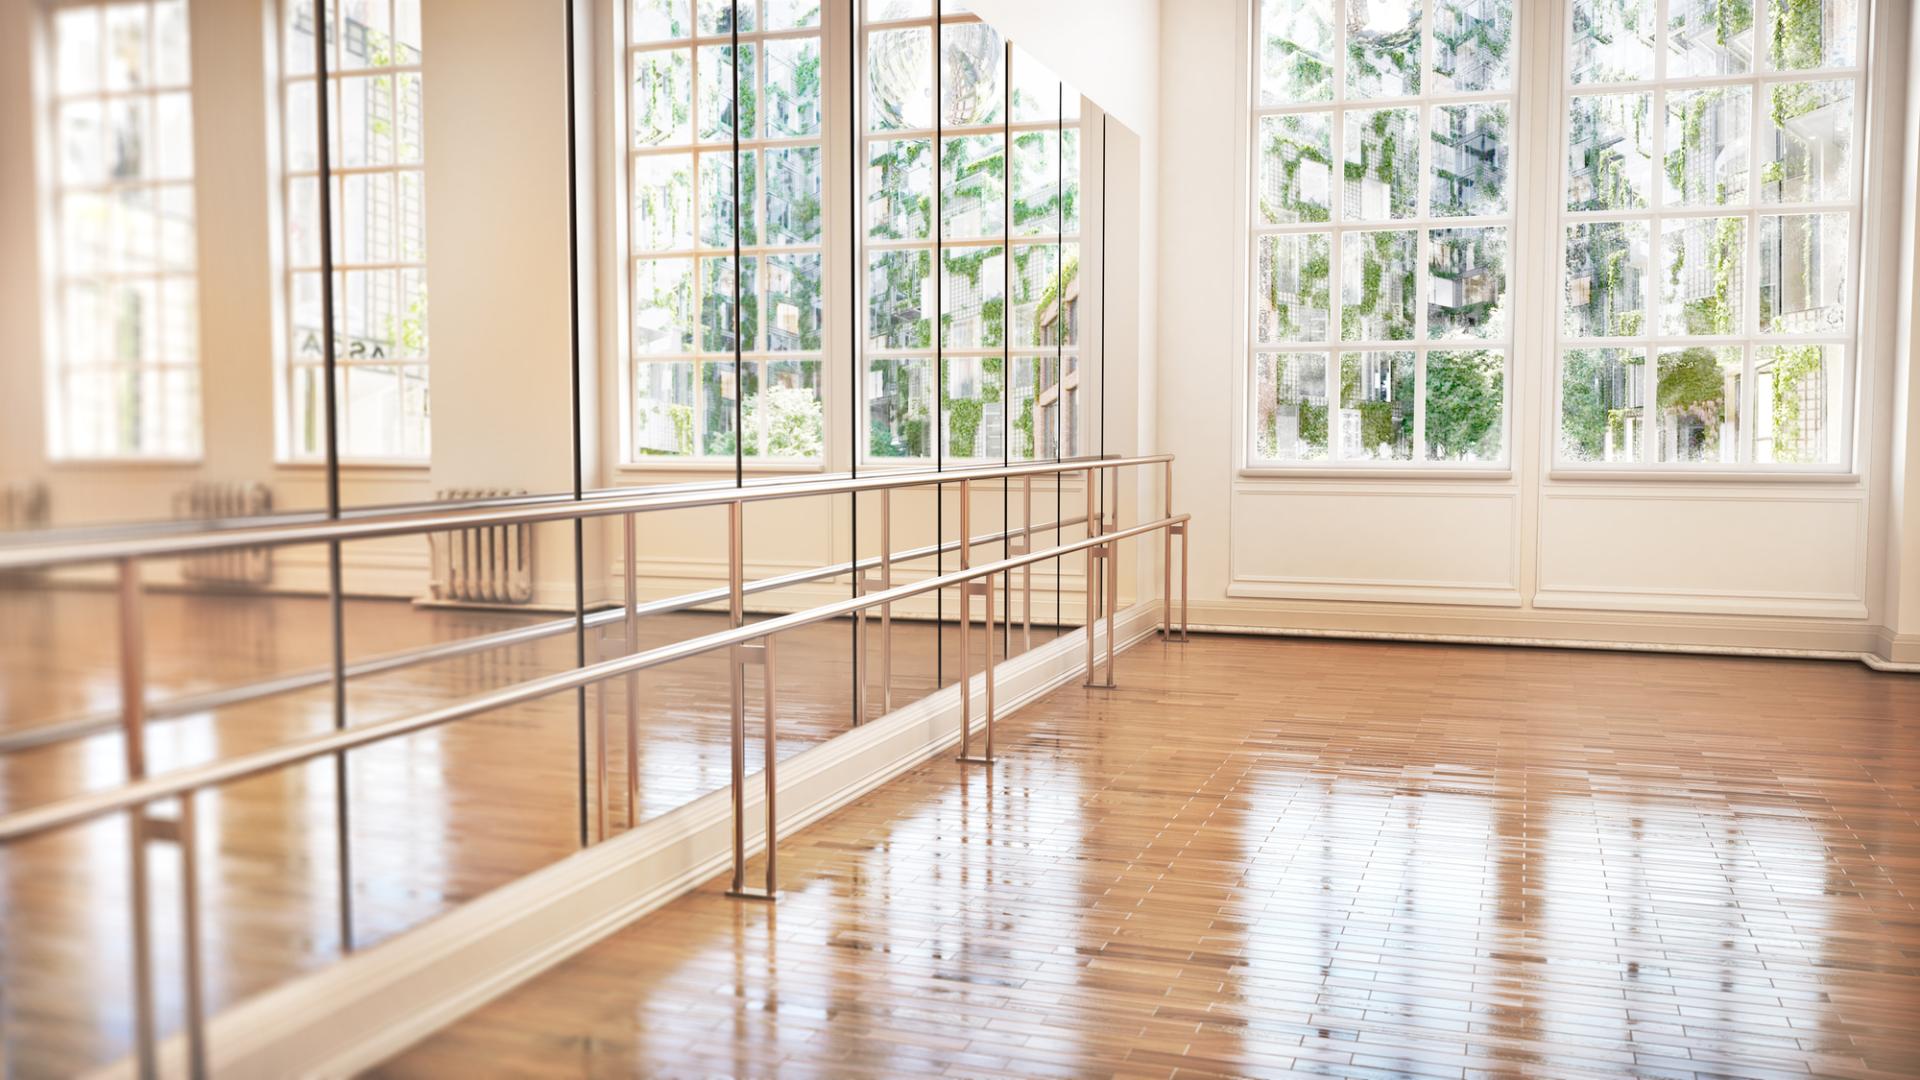 Dance Studios for Hire in South London